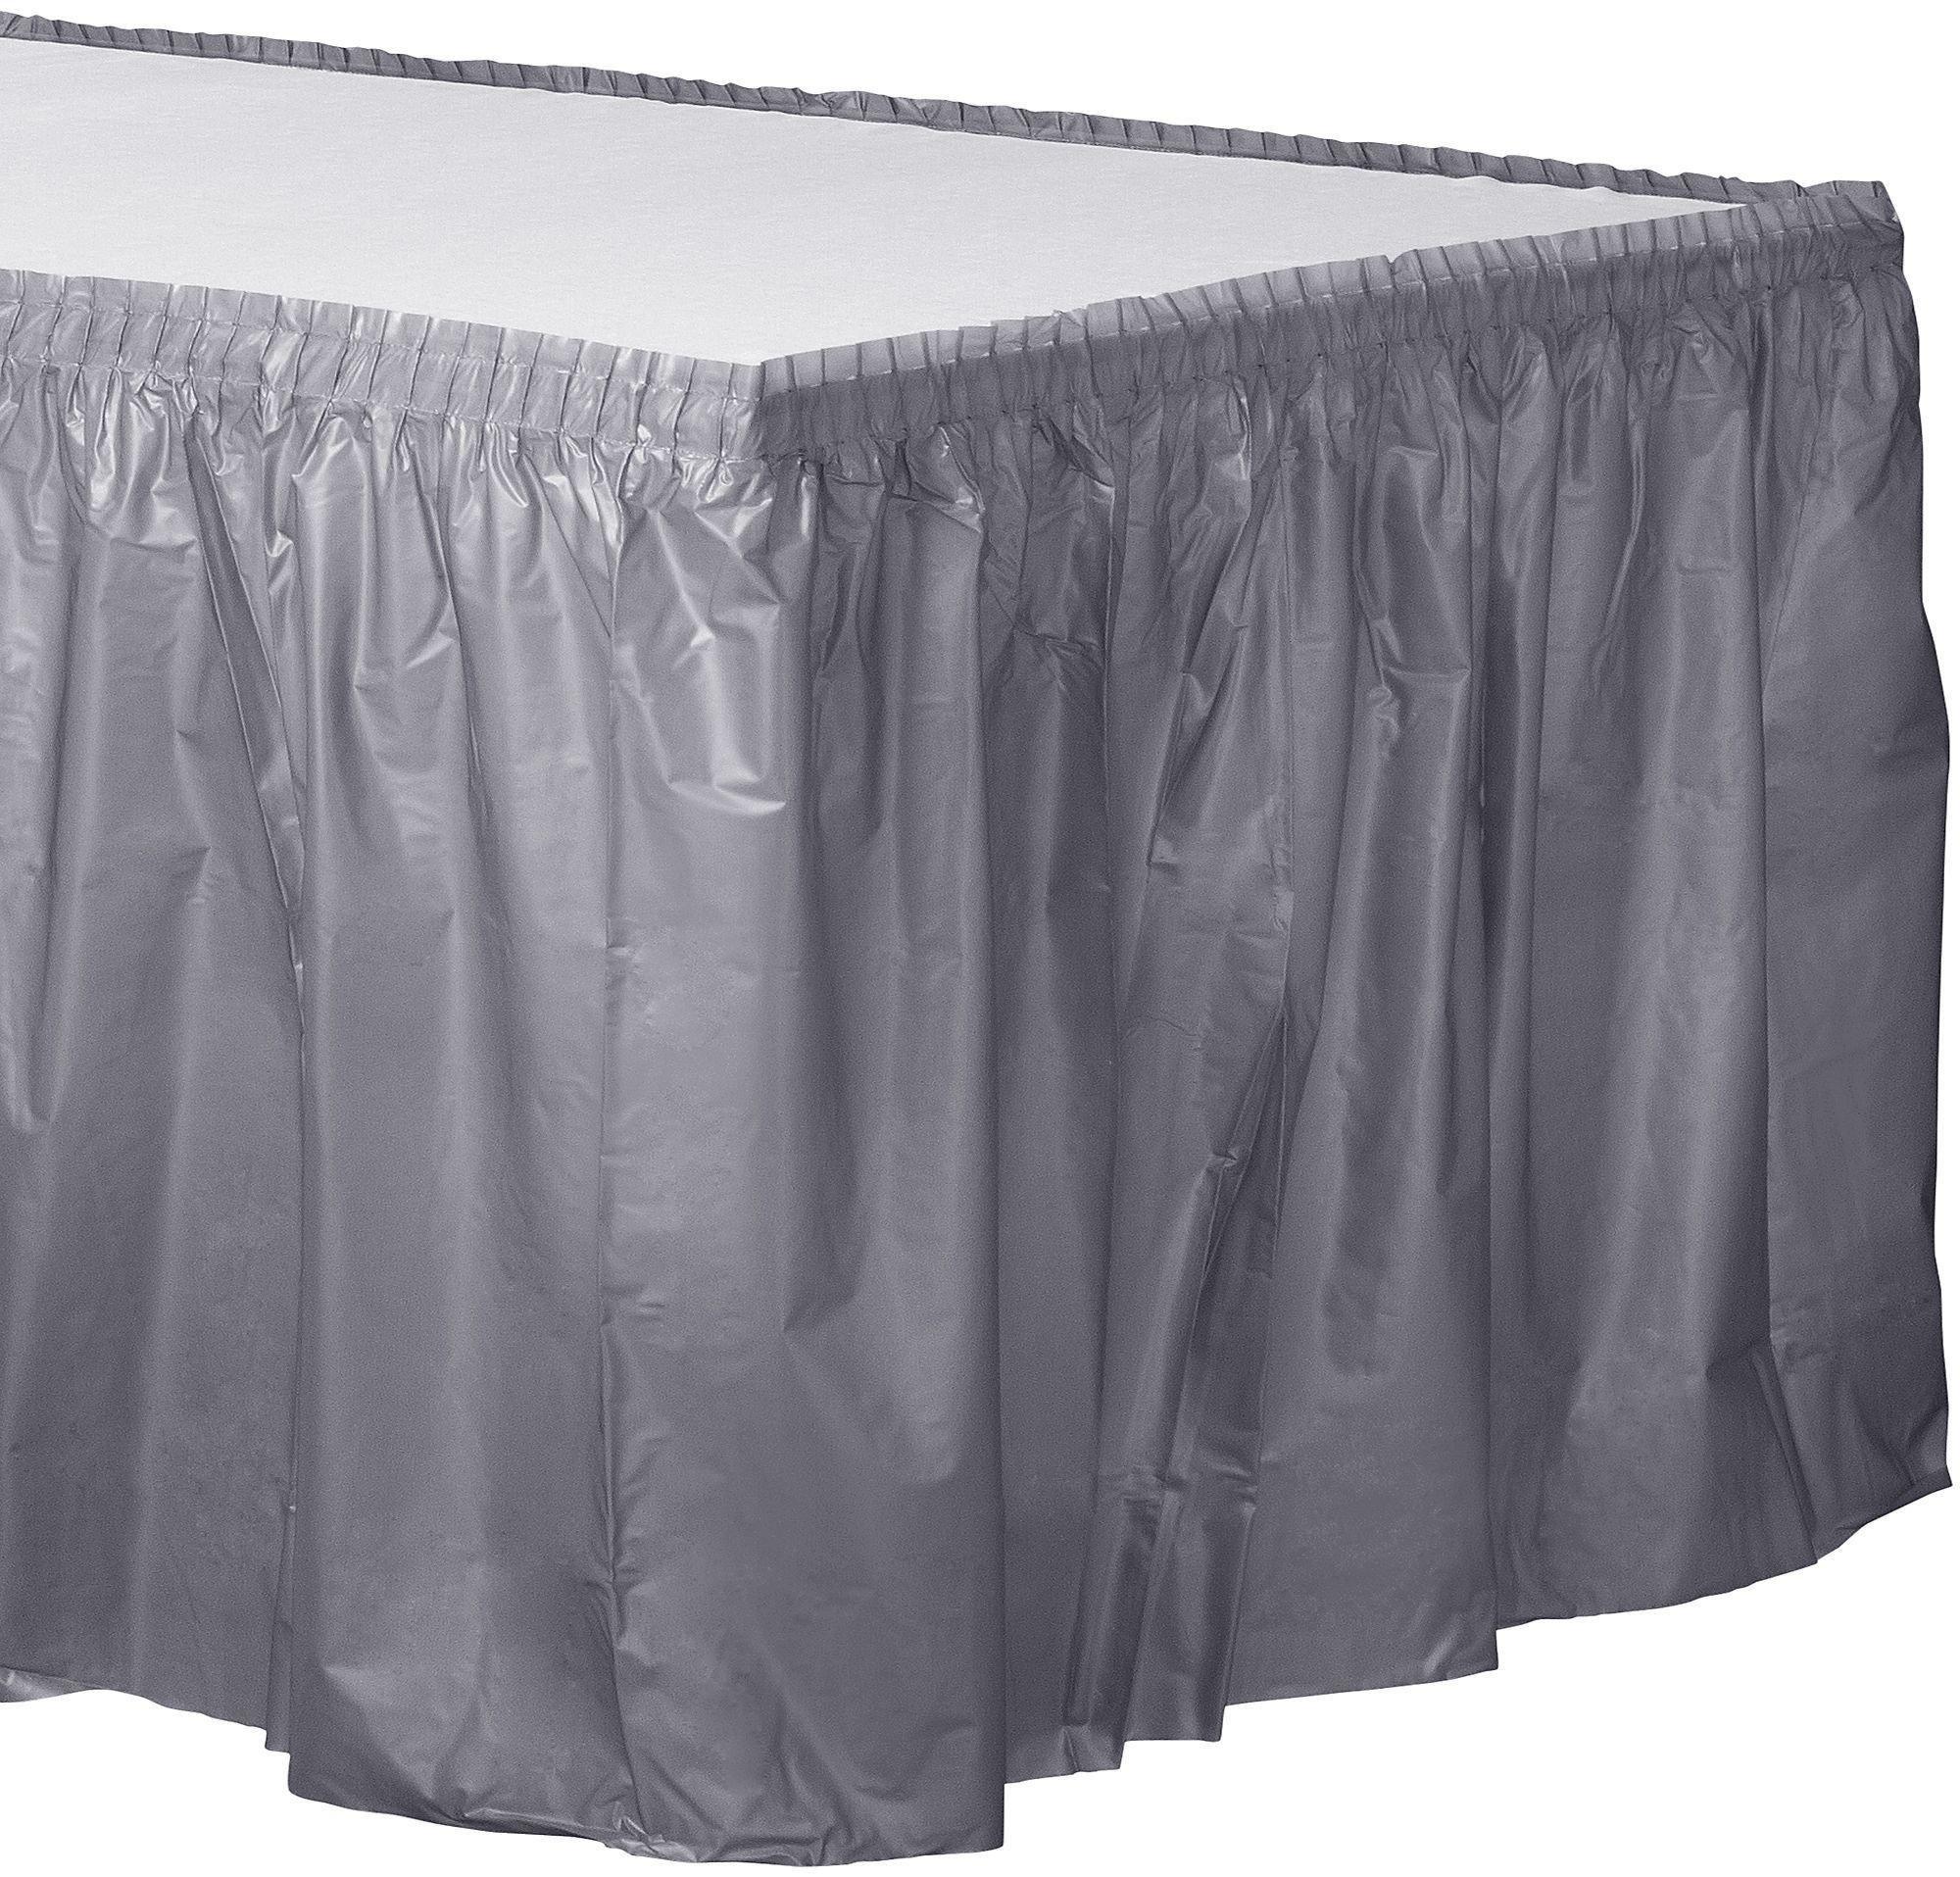 Silver Plastic Table Skirt, 21ft x 29in